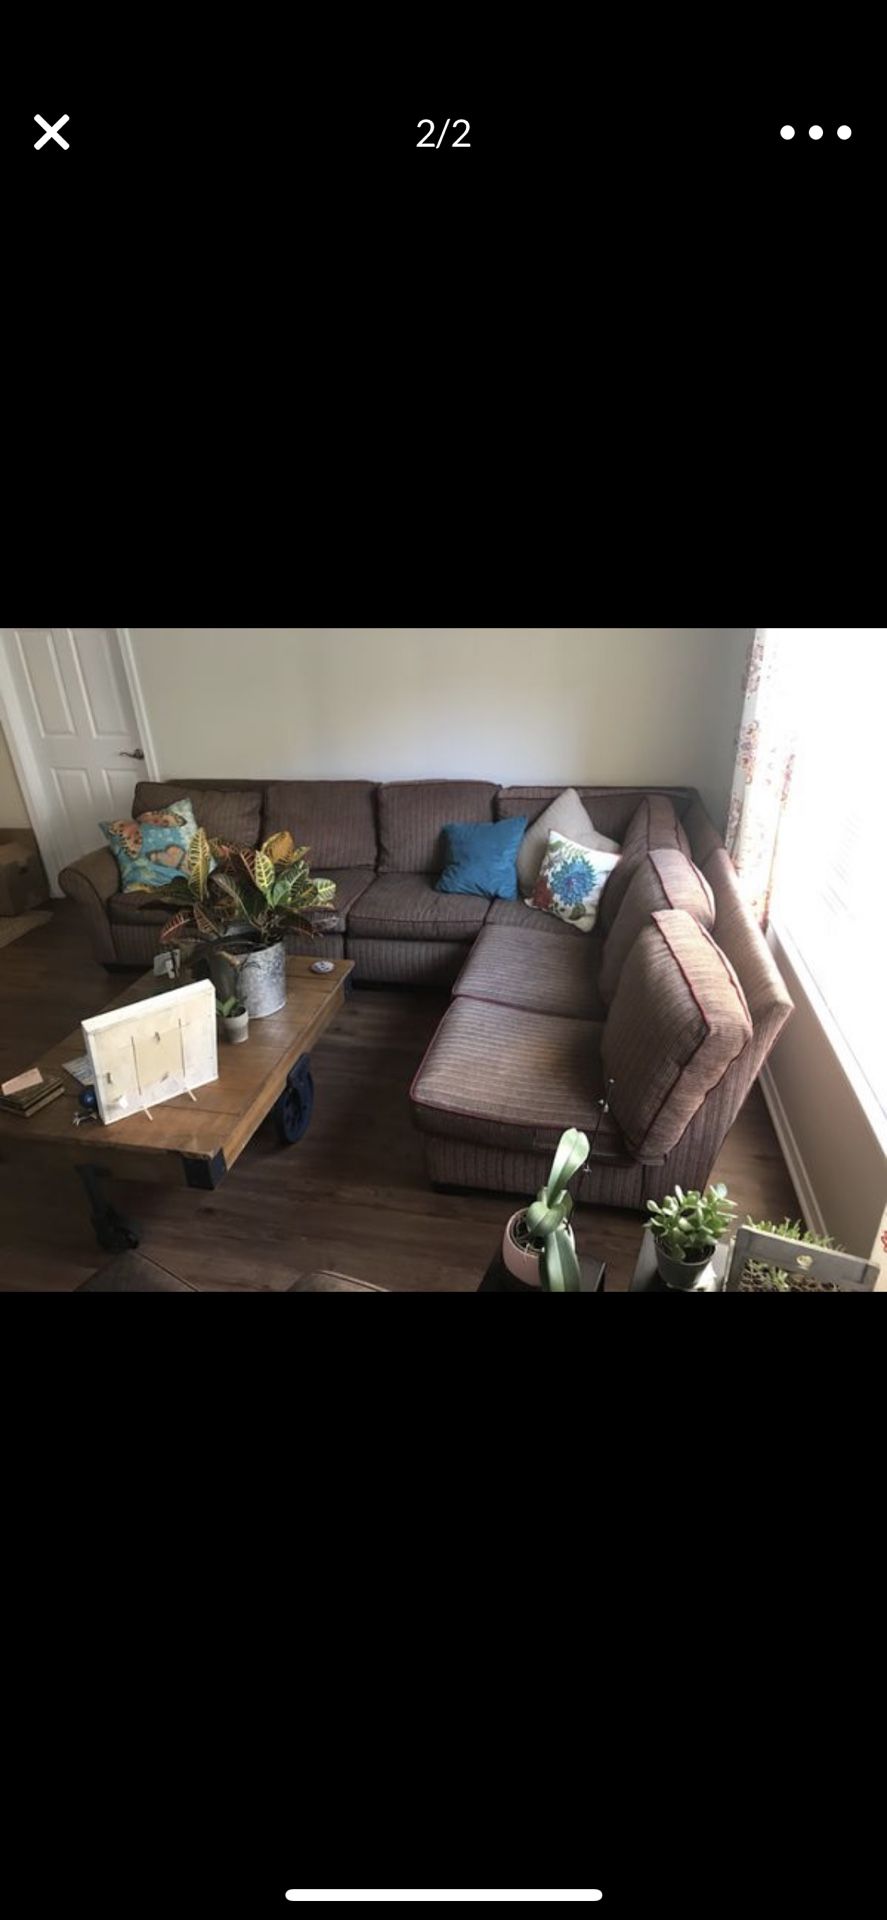 This is an original Brentwood sectional couch sofa from Arhaus Furniture, originally $5,500. I’m moving and won’t have the space for it. I’ve owned